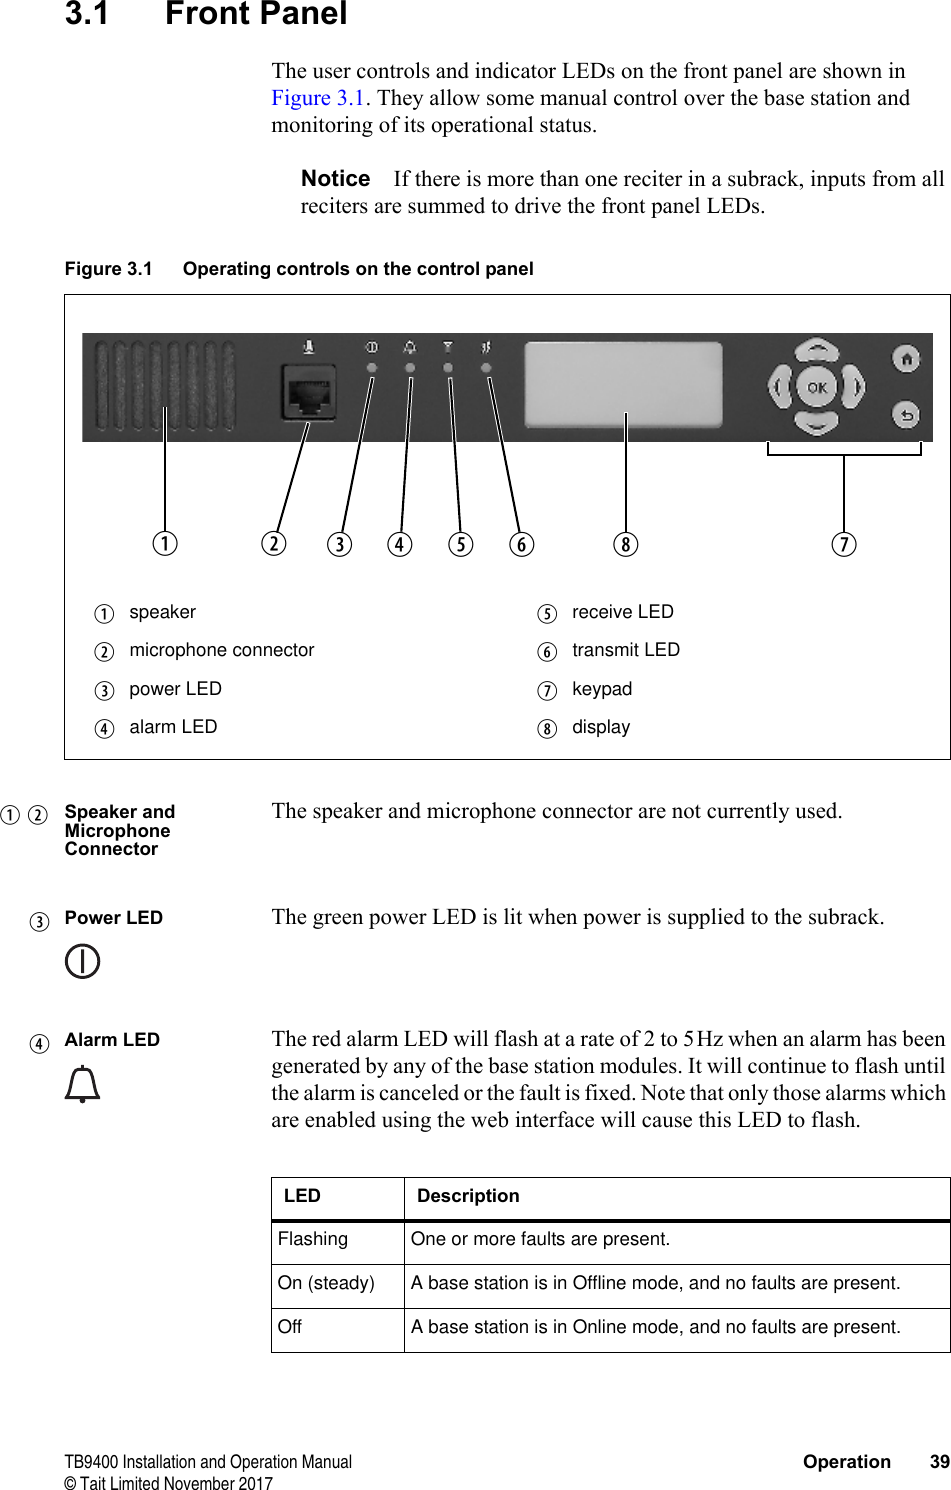  TB9400 Installation and Operation Manual Operation 39© Tait Limited November 20173.1 Front PanelThe user controls and indicator LEDs on the front panel are shown in Figure 3.1. They allow some manual control over the base station and monitoring of its operational status.Notice If there is more than one reciter in a subrack, inputs from all reciters are summed to drive the front panel LEDs.Speaker and Microphone ConnectorThe speaker and microphone connector are not currently used.Power LED The green power LED is lit when power is supplied to the subrack.Alarm LED The red alarm LED will flash at a rate of 2 to 5Hz when an alarm has been generated by any of the base station modules. It will continue to flash until the alarm is canceled or the fault is fixed. Note that only those alarms which are enabled using the web interface will cause this LED to flash.Figure 3.1 Operating controls on the control panelbspeaker freceive LEDcmicrophone connector gtransmit LEDdpower LED hkeypadealarm LED idisplaybcdefgi hb cdeLED DescriptionFlashing One or more faults are present.On (steady) A base station is in Offline mode, and no faults are present.Off A base station is in Online mode, and no faults are present.